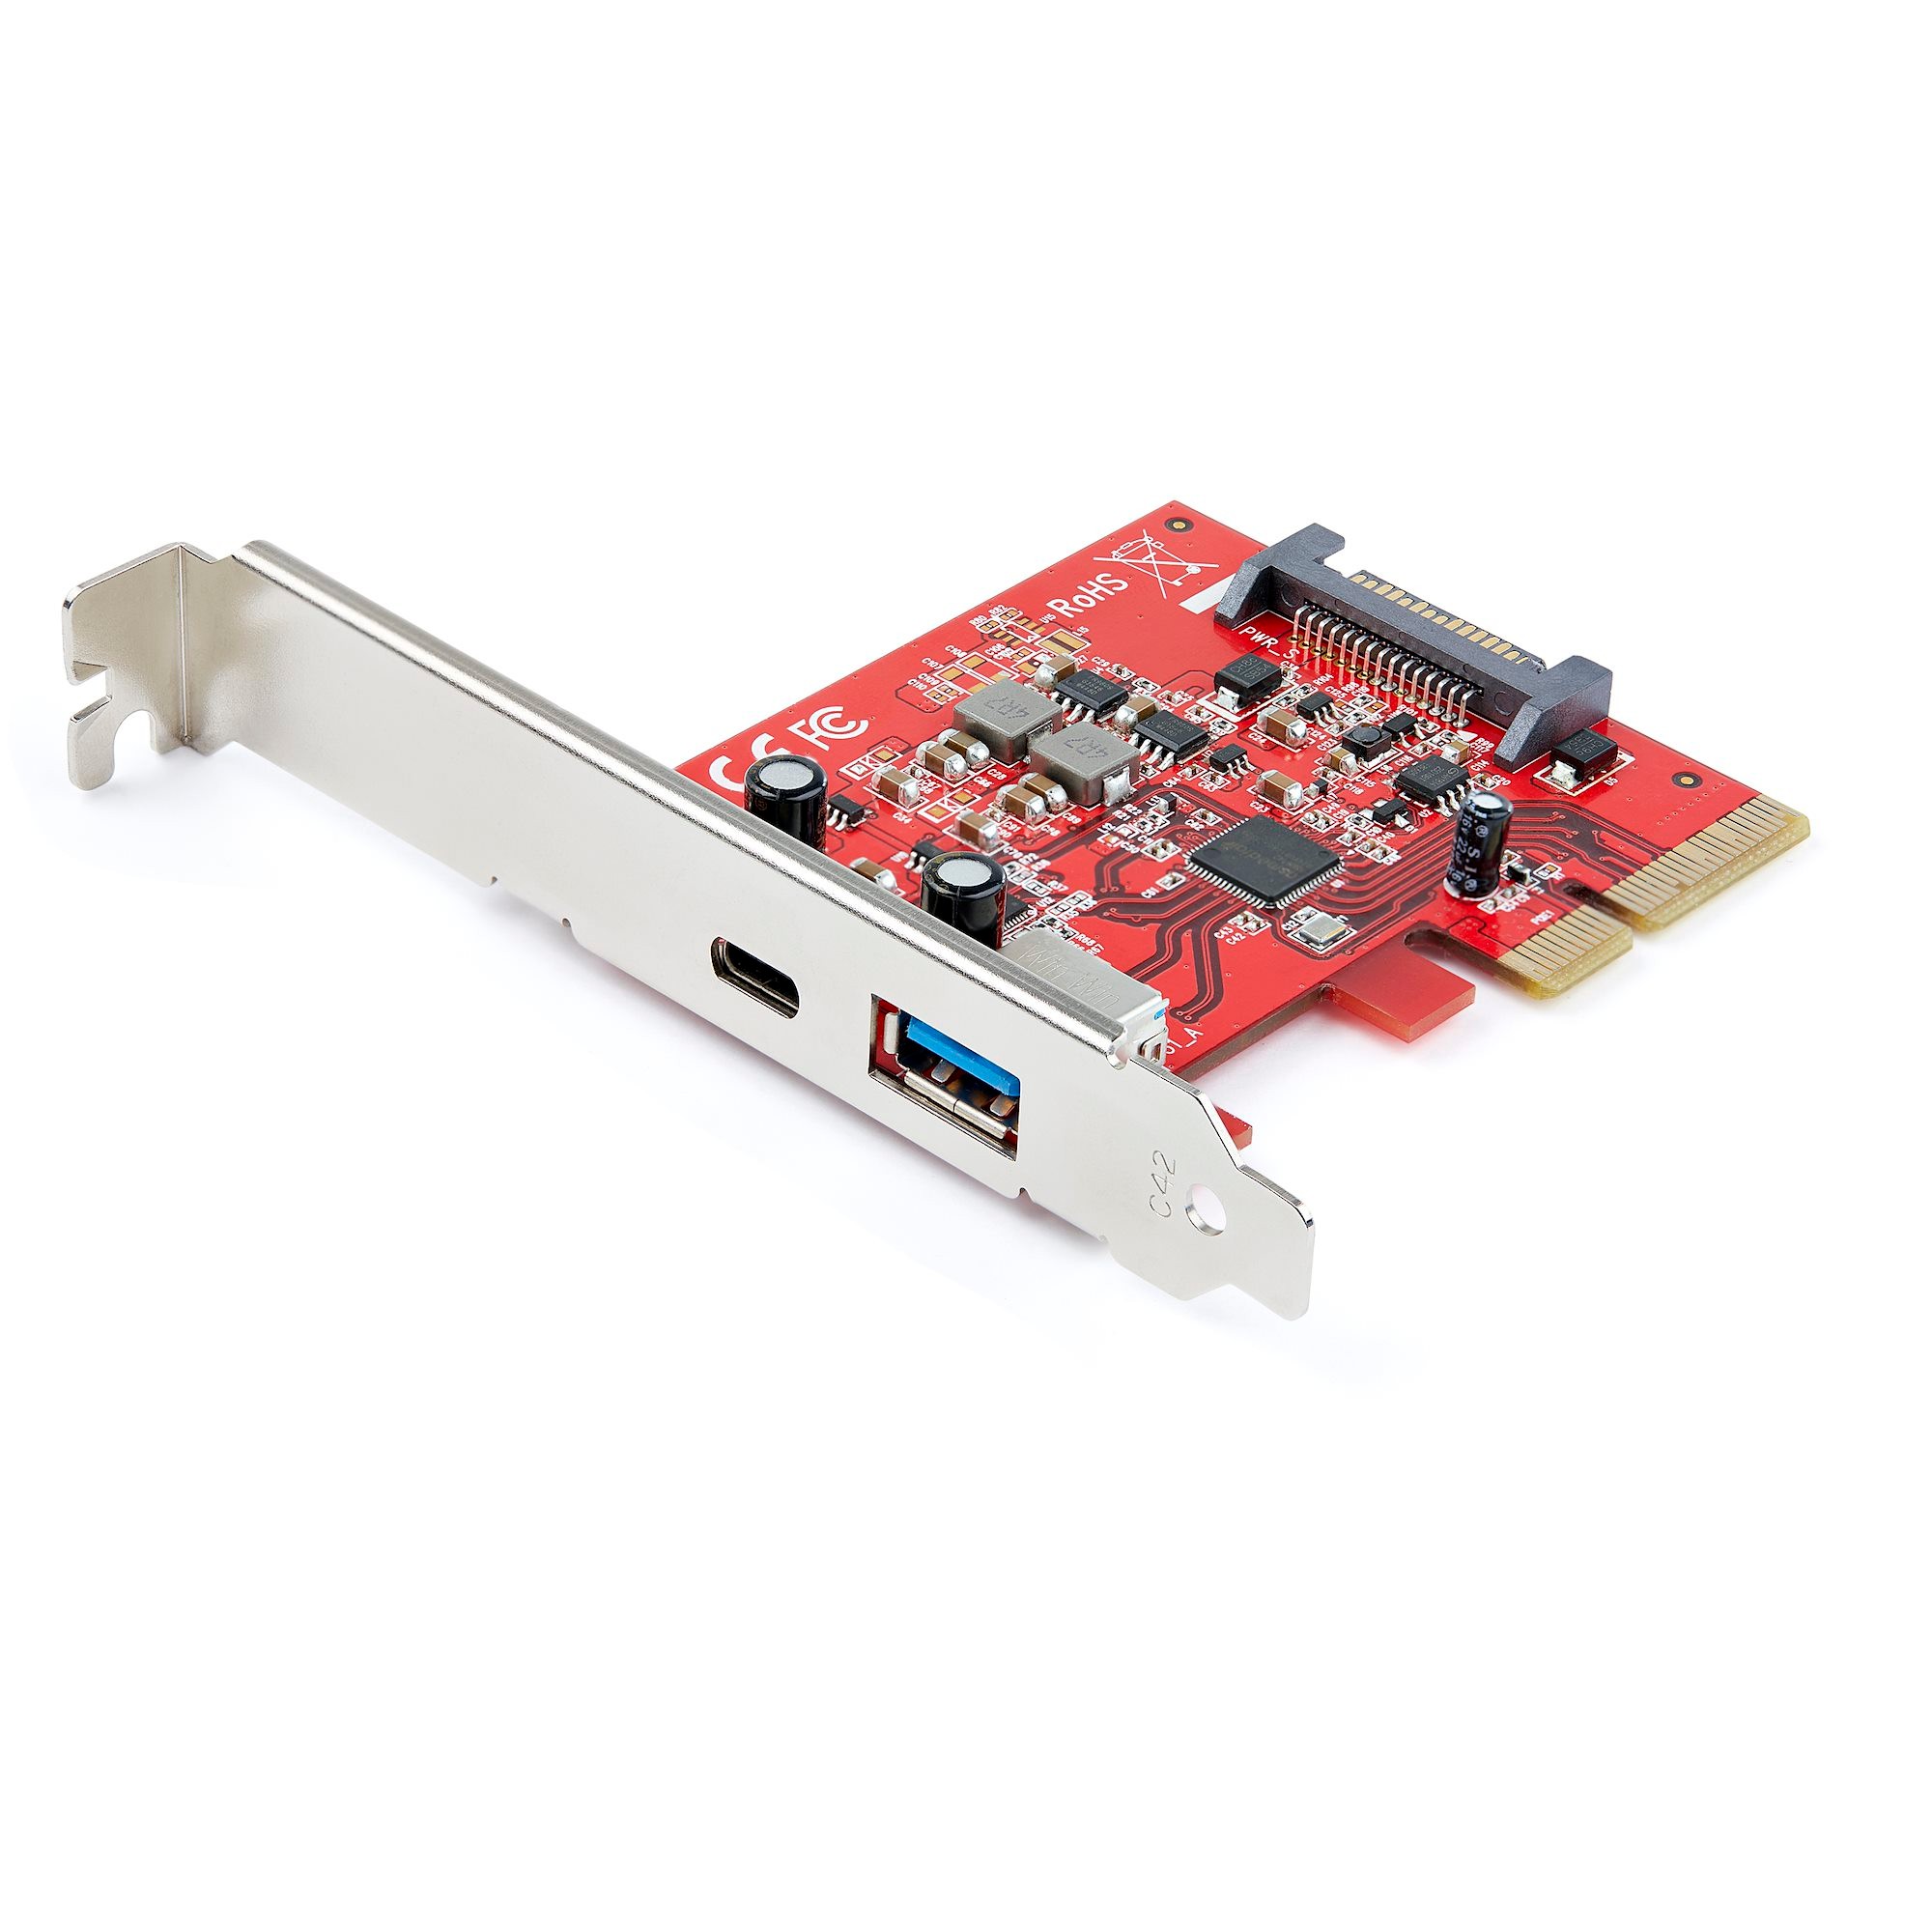 StarTech.com 4 Port PCI Express (PCIe) SuperSpeed USB 3.0 Card Adapter w/ 2  Dedicated 5Gbps Channels - UASP - SATA / LP4 Power - Add four USB 3.0 ports  with two independent